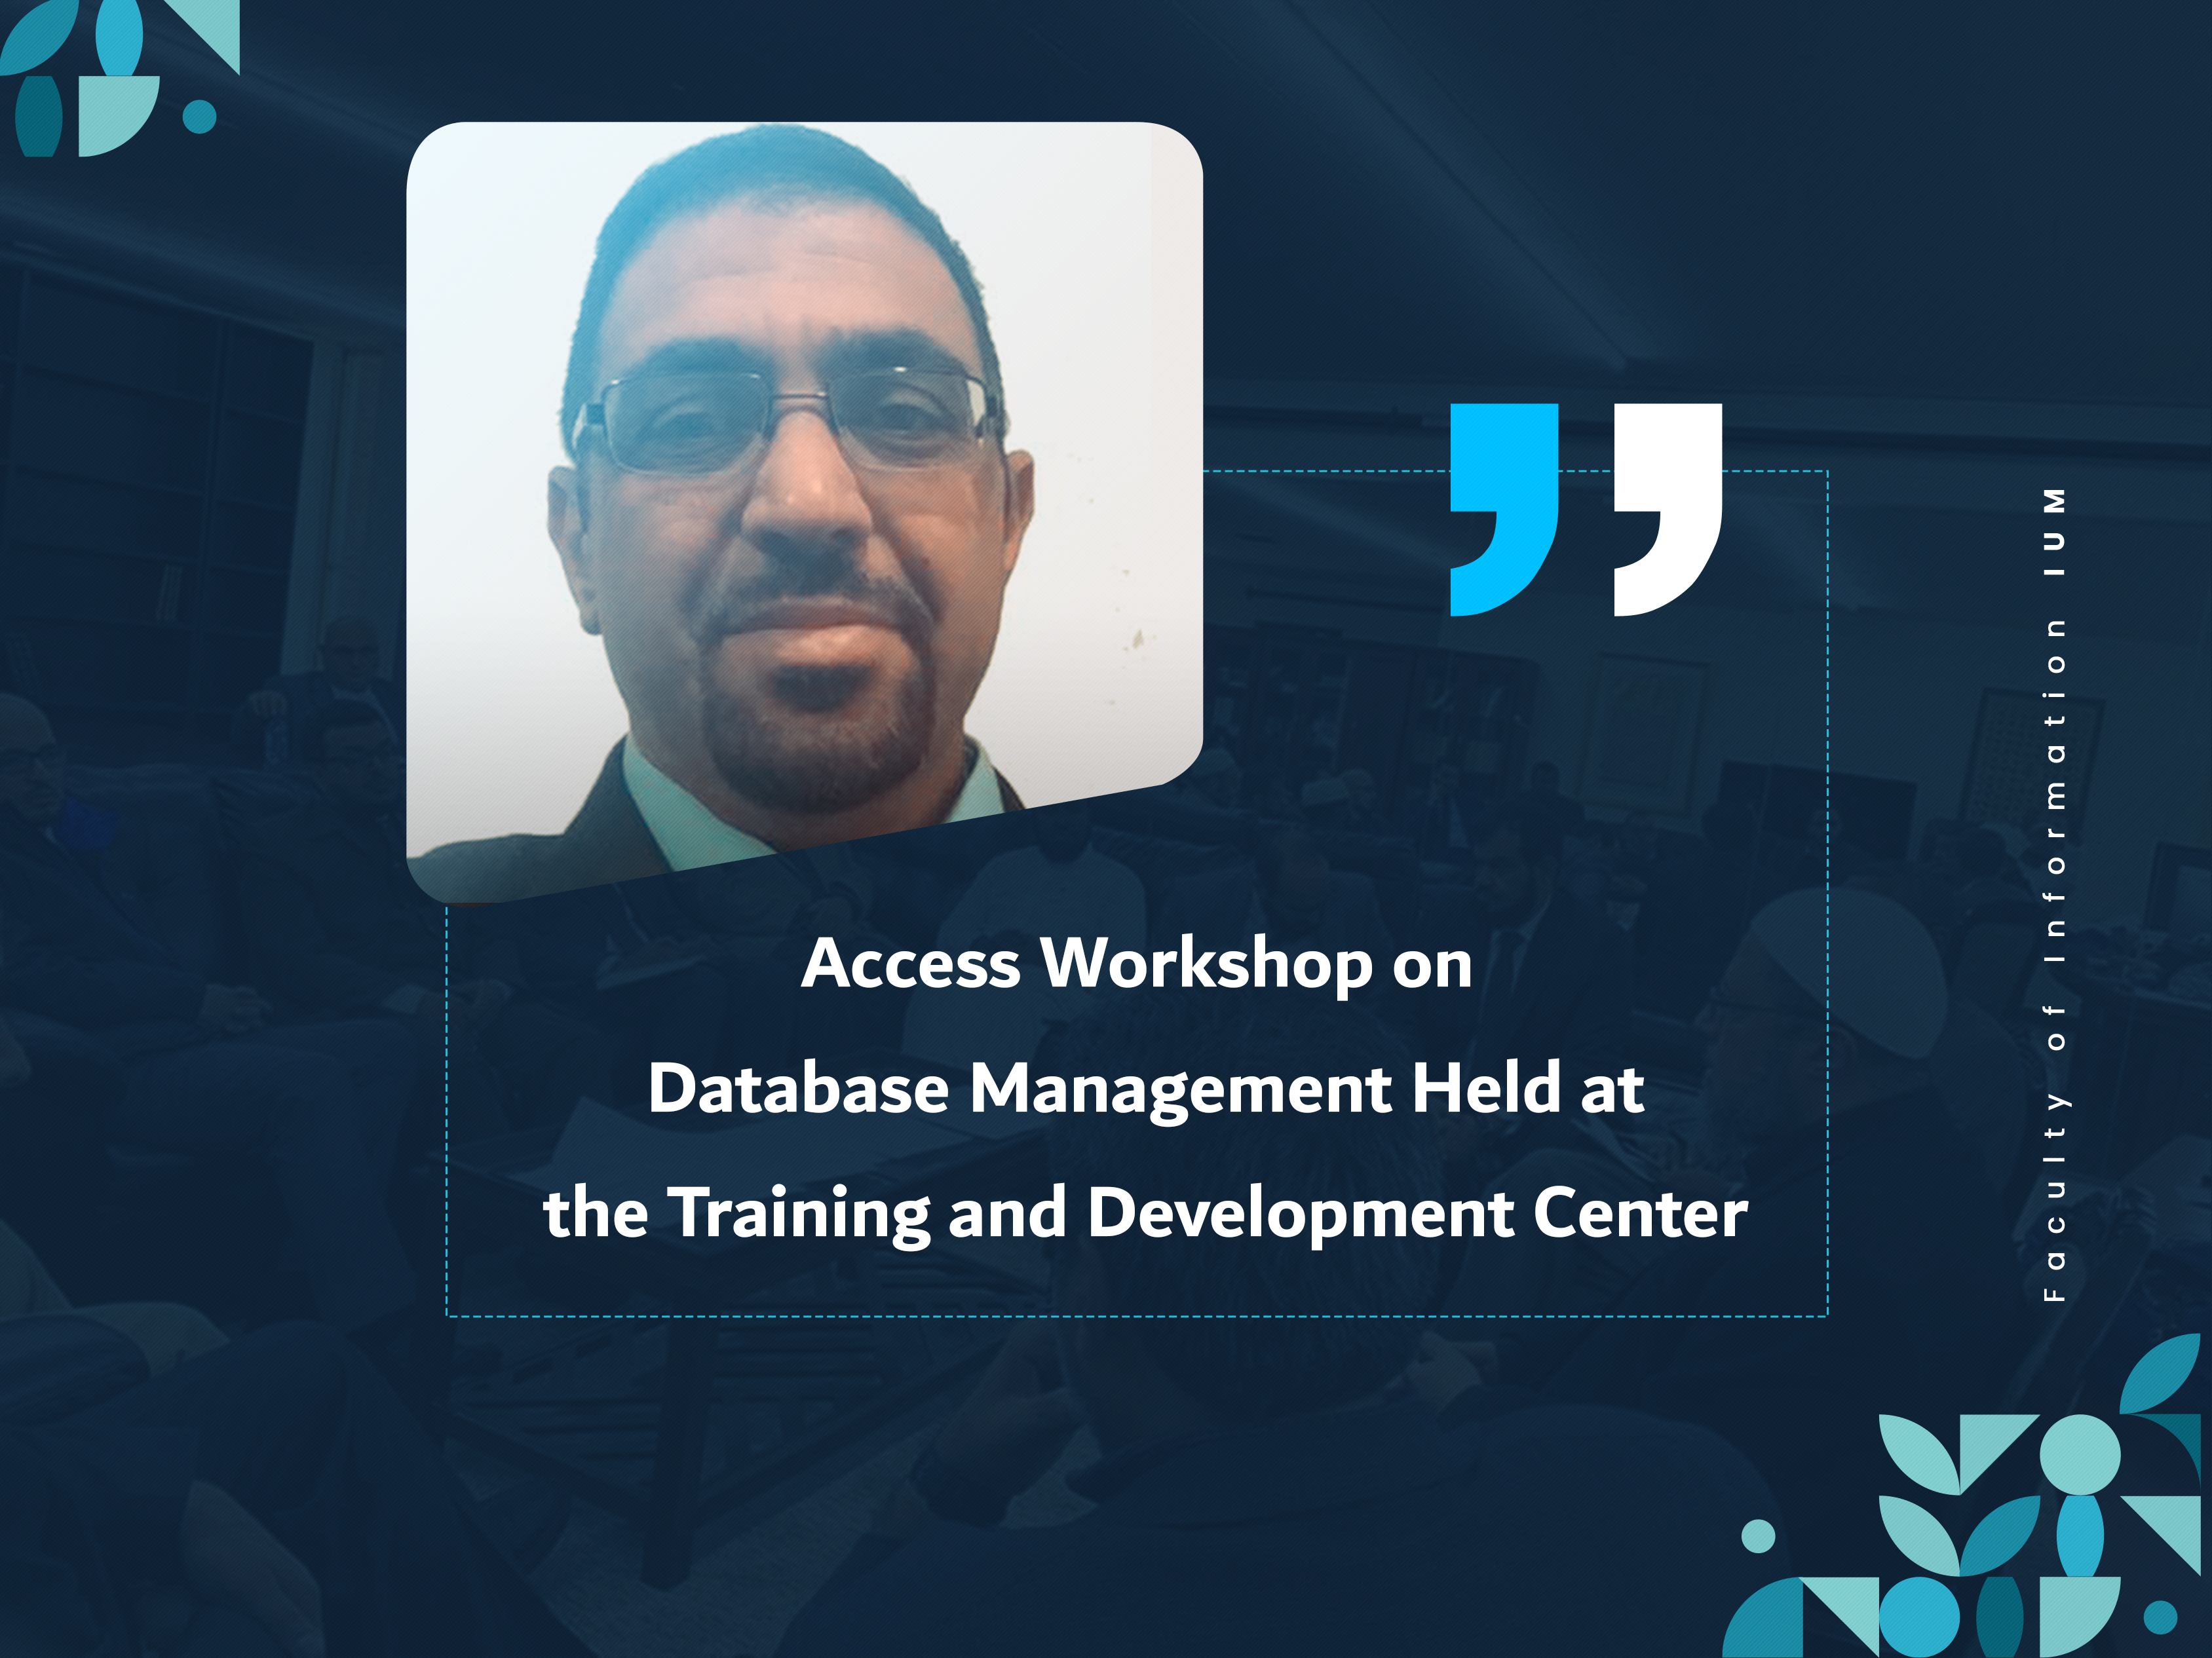 Access Workshop on Database Management Held at the Training and Development Center